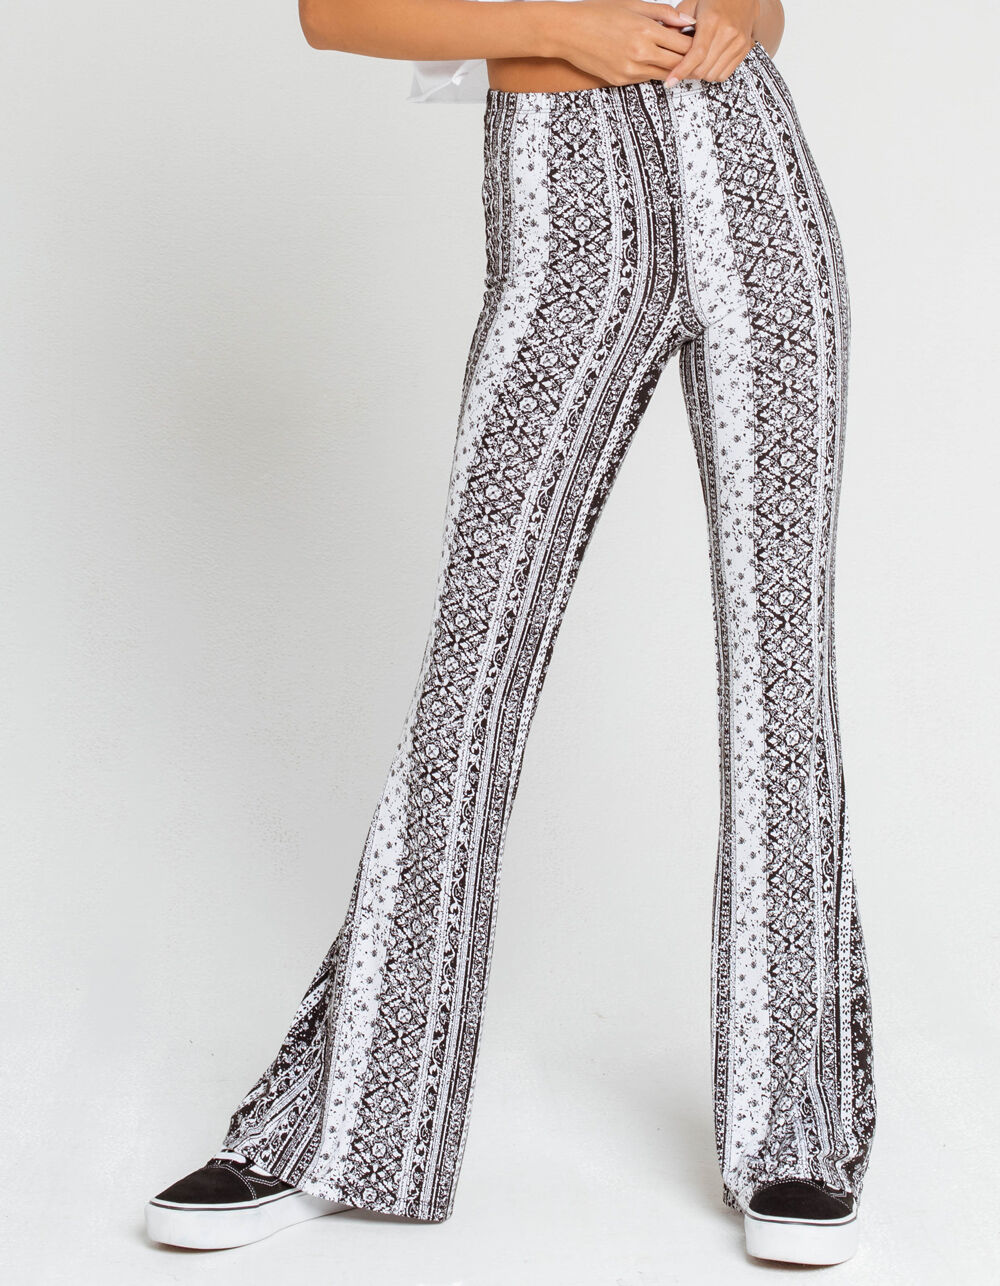 SKY AND SPARROW Tile Linear Print Womens Black & White Flare Pants ...